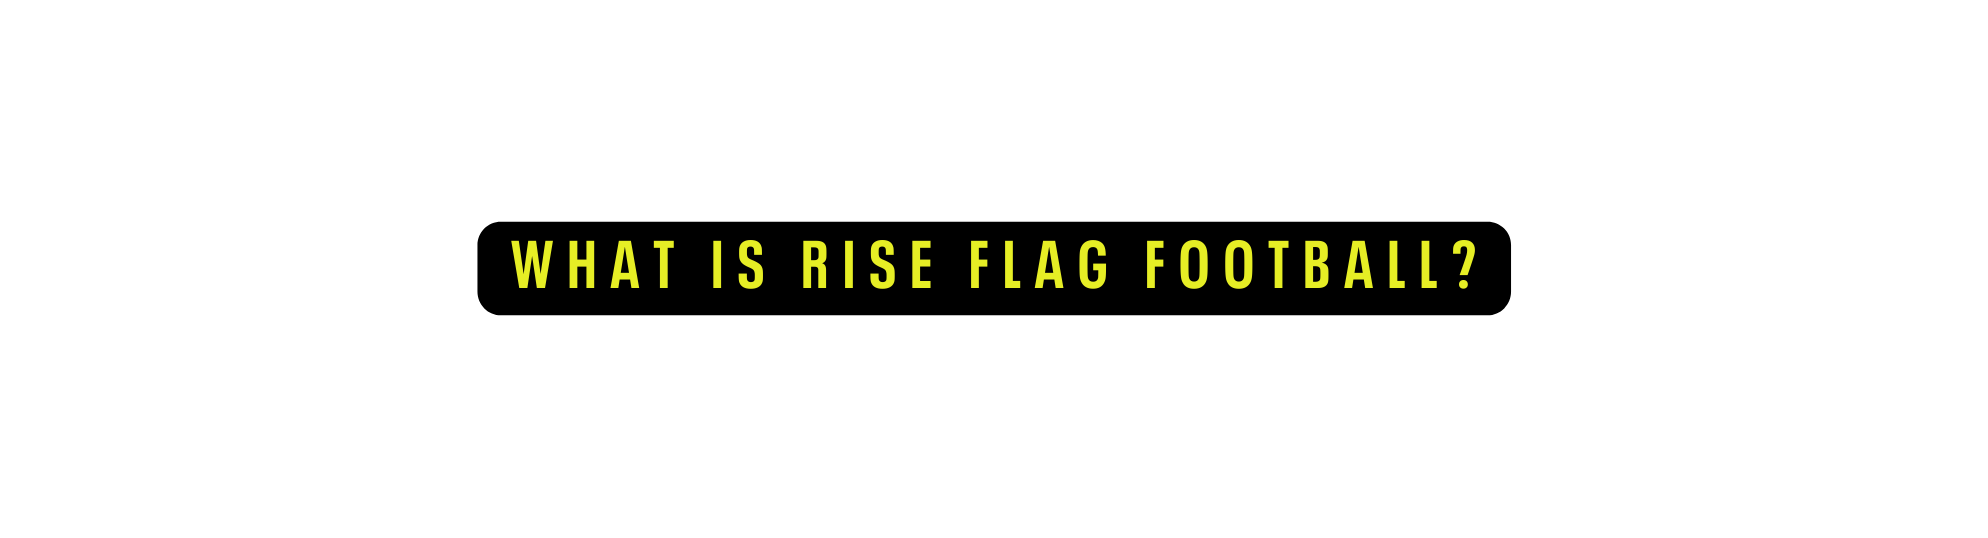 WHAT IS RISE FLAG FOOTBALL